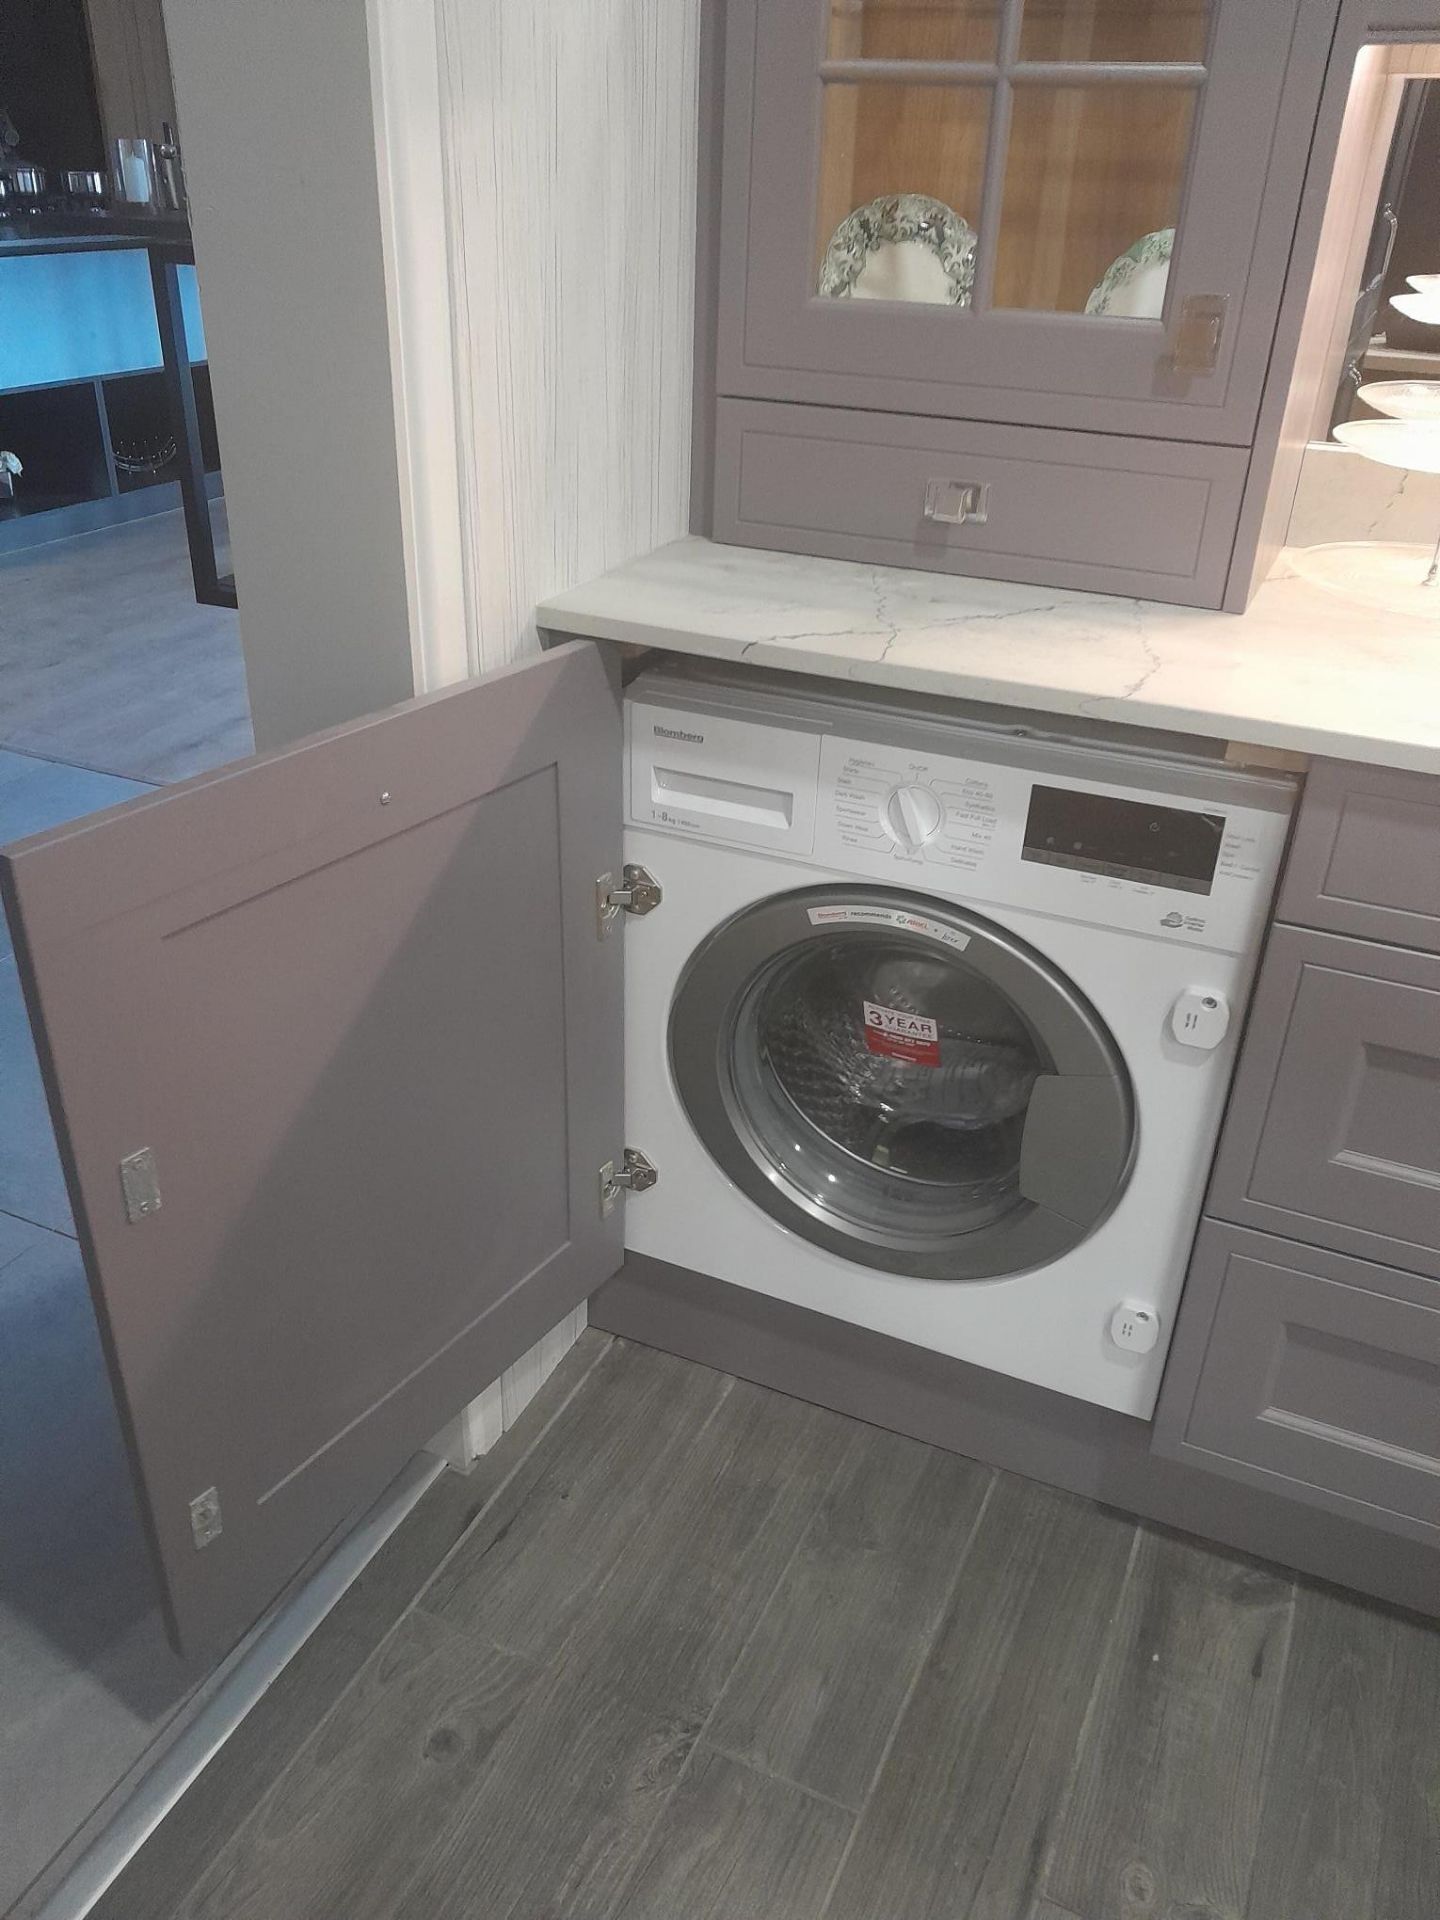 Lilac traditional English shaker kitchen to include Blomberg LWI284410 integrated washing machine, - Image 3 of 5